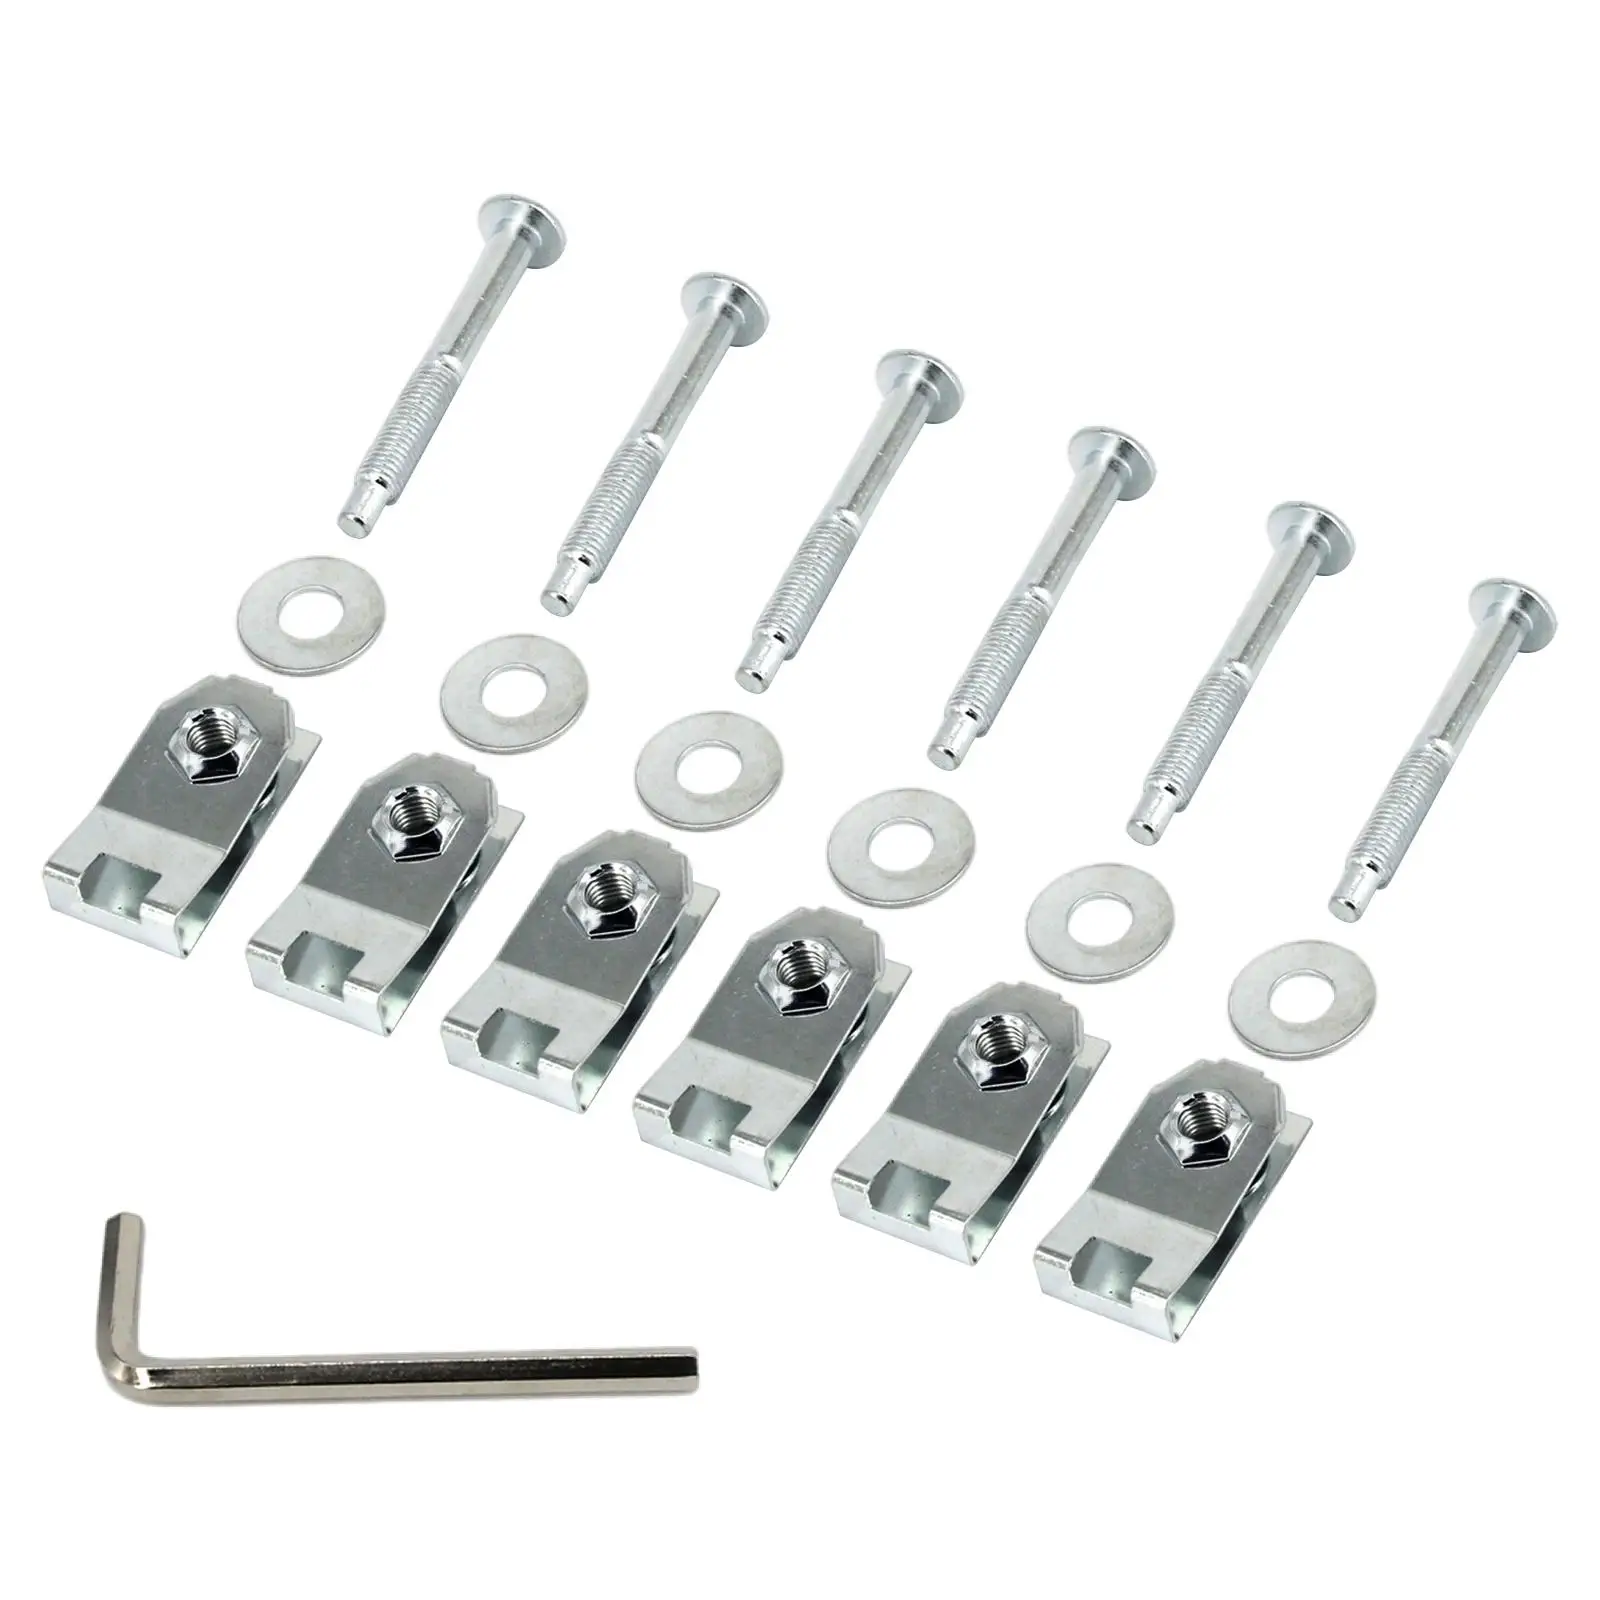 19Pcs Truck Bed Mount Bolts Kit Moulding  ,6Pcs Washers ,Hardware Fits for    97-2014 924-313 W708605-S436 W709424-S901